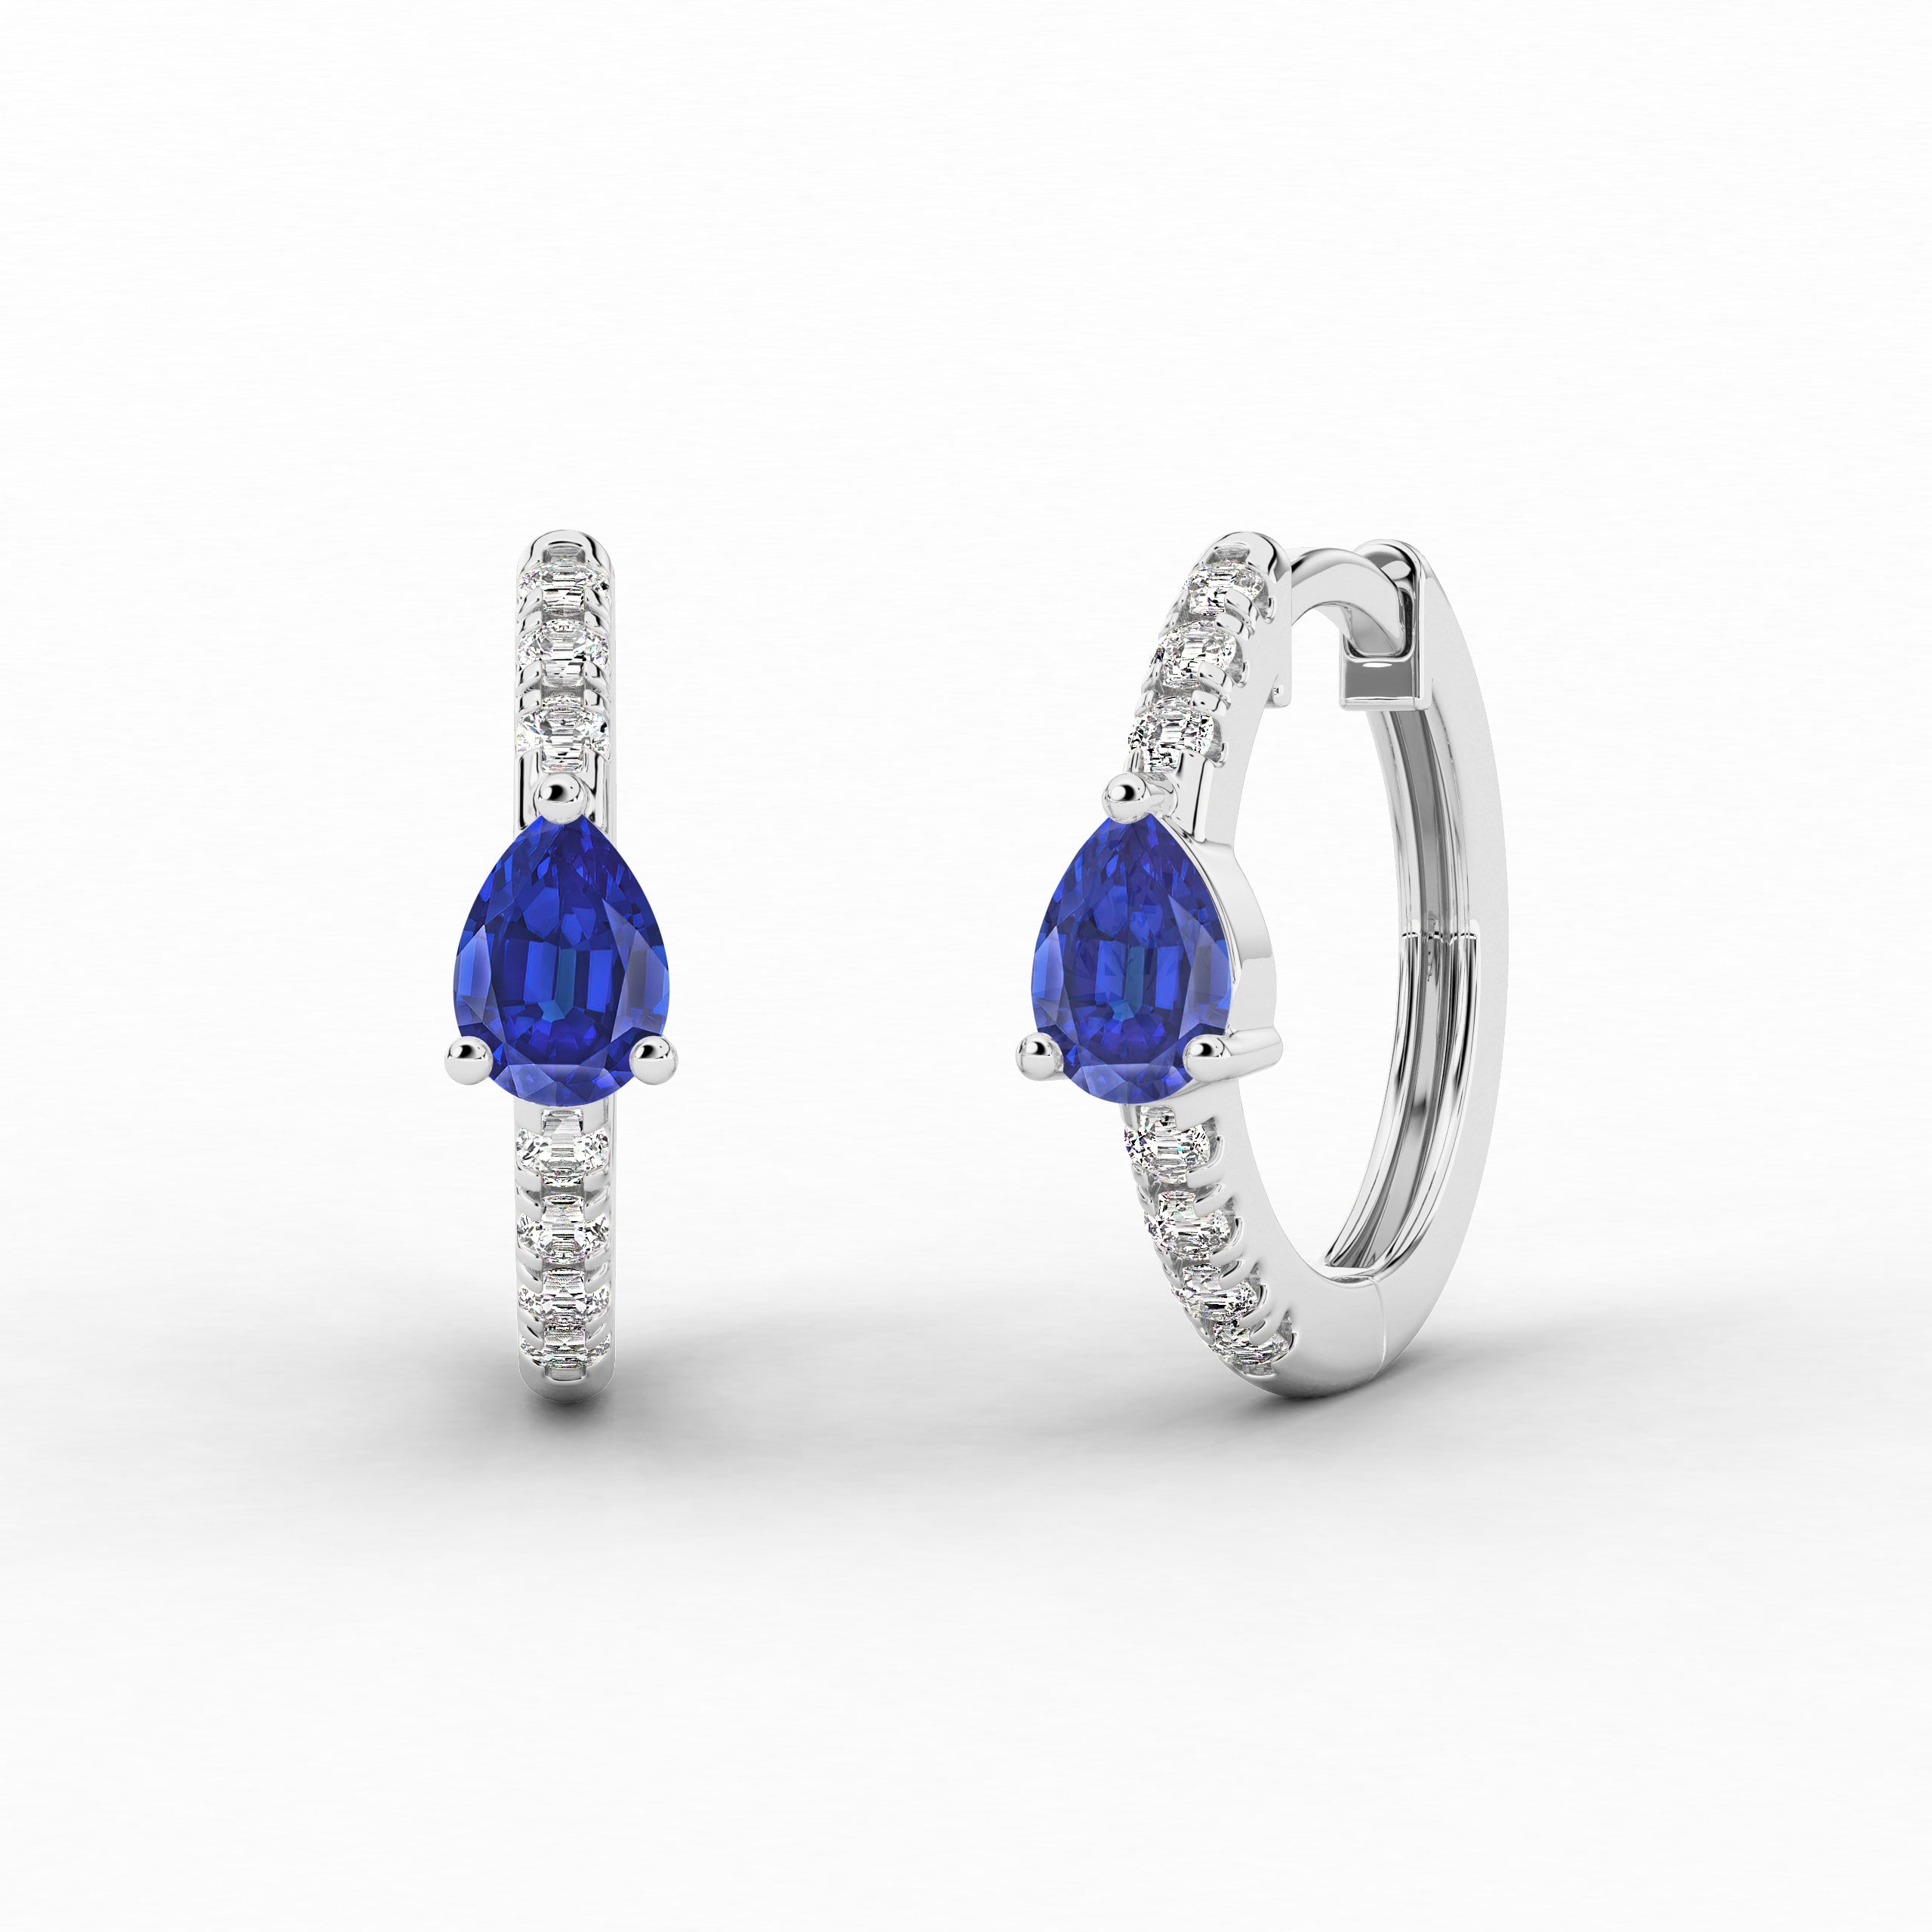  White Gold Hoop Earring In Pear And Blue Sapphire Cut Moissanite Diamond Wedding Gift For Woman